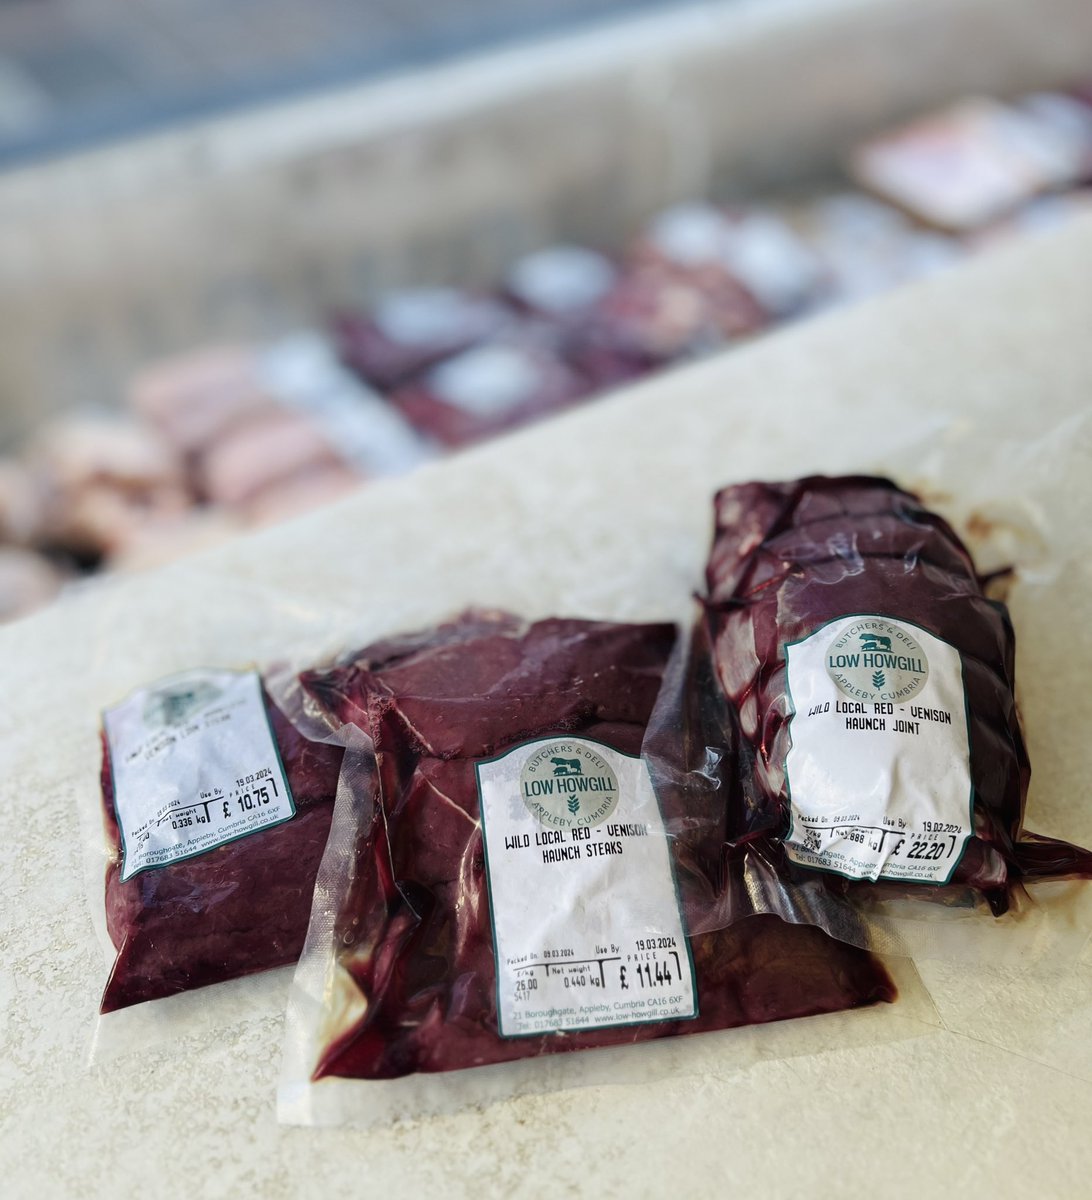 Our @banksiemagic is at Keswick Market today & he’s got plenty of our popular Cumberland & Wild Garlic sausages as well as our other sausage of the month, Spanish style Paprika! There’s also plenty of Shorthorn Beef, Herdwick Lamb & local wild Venison.